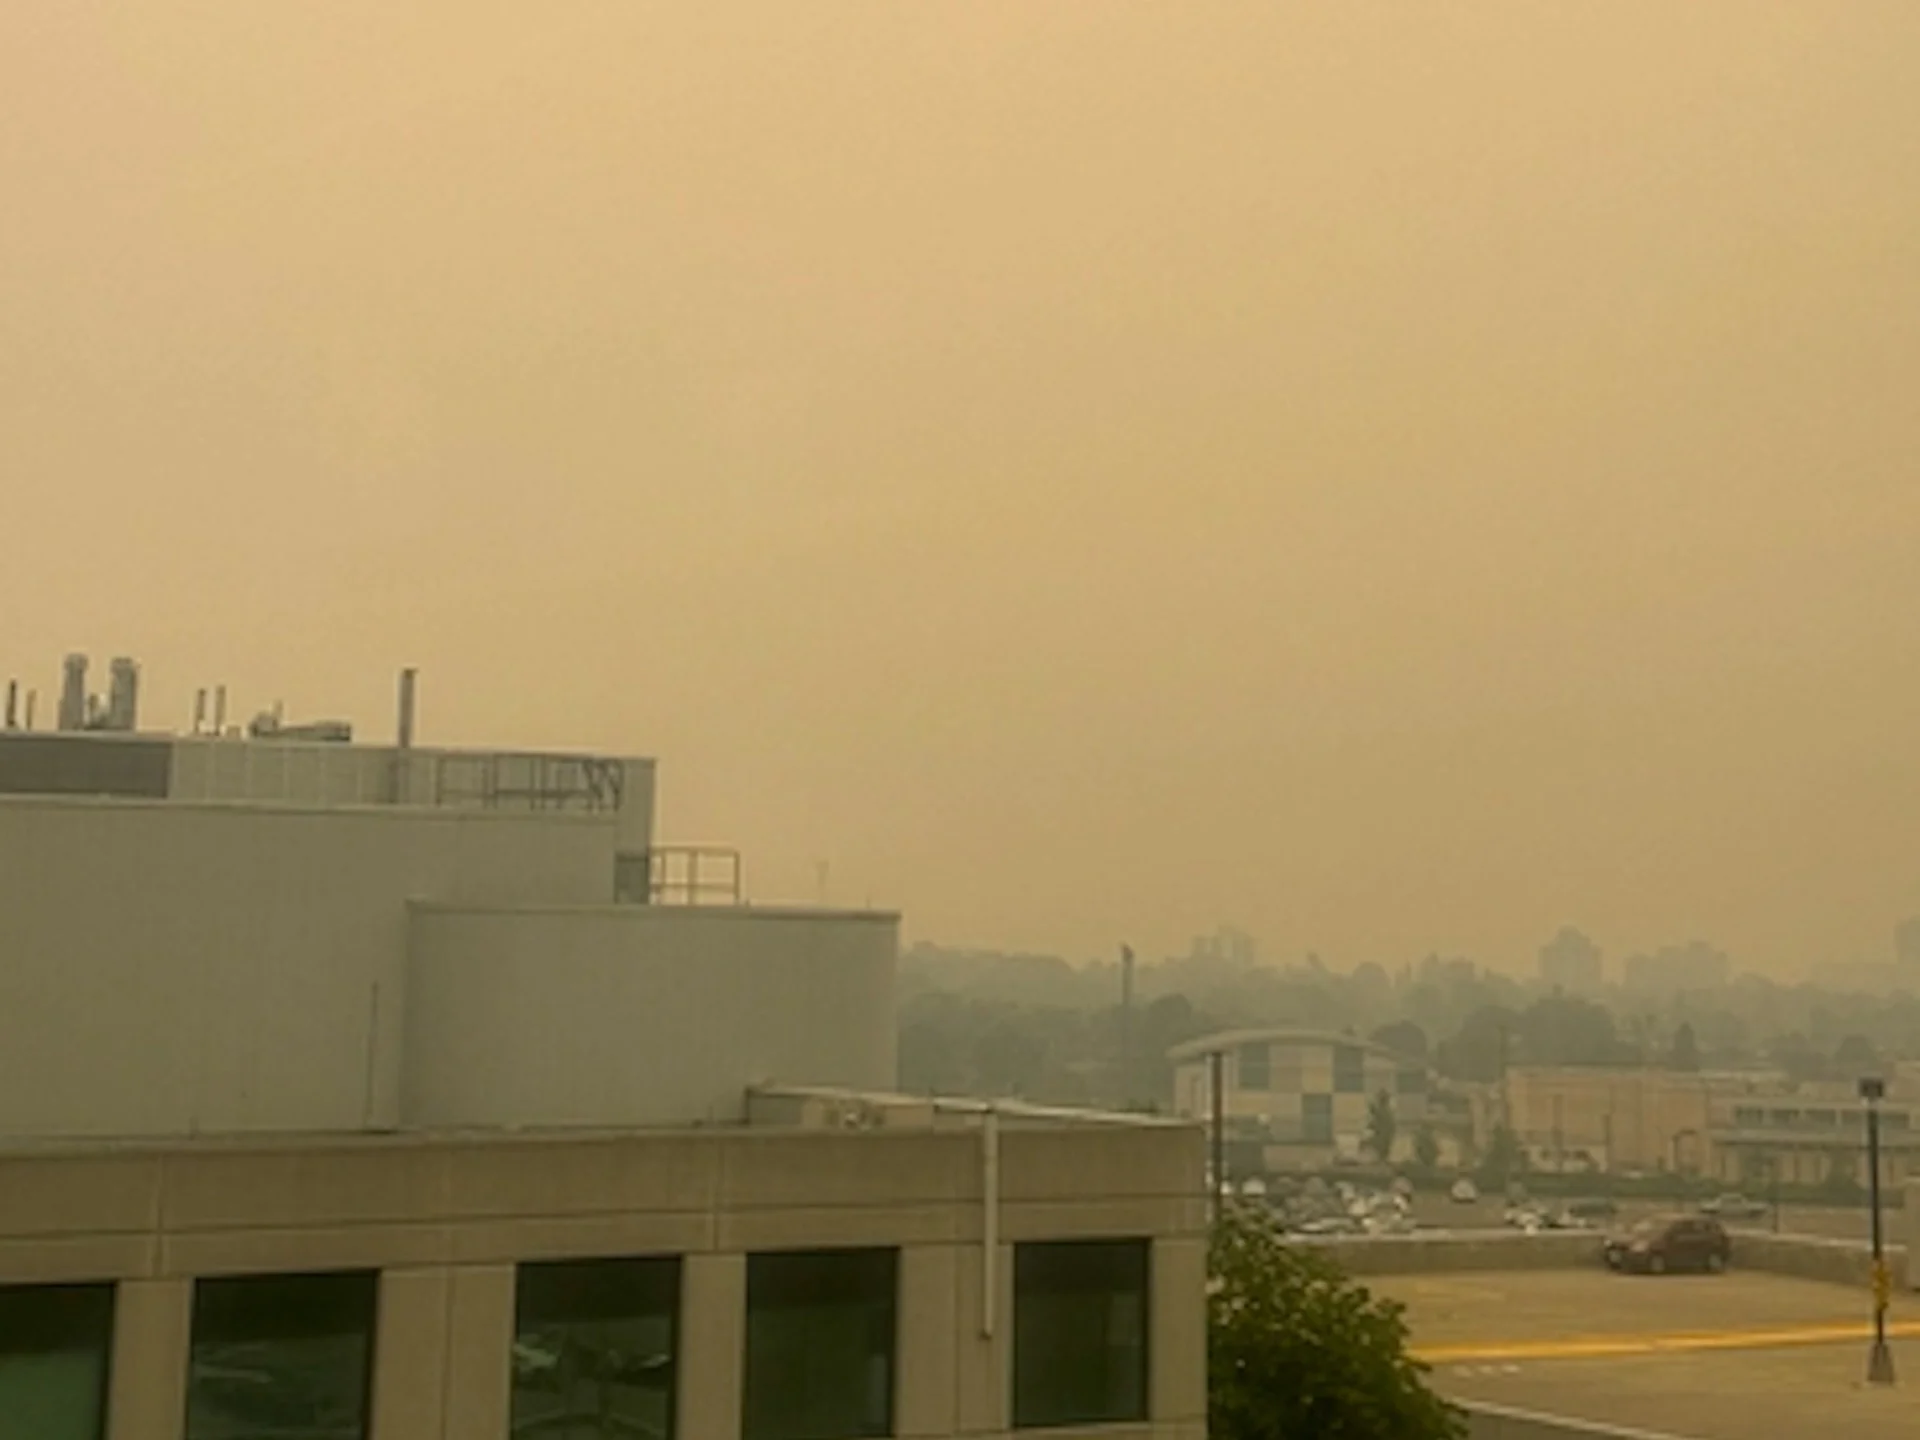 Wildfire smoke puts millions of Canadians at health risk as air quality drops